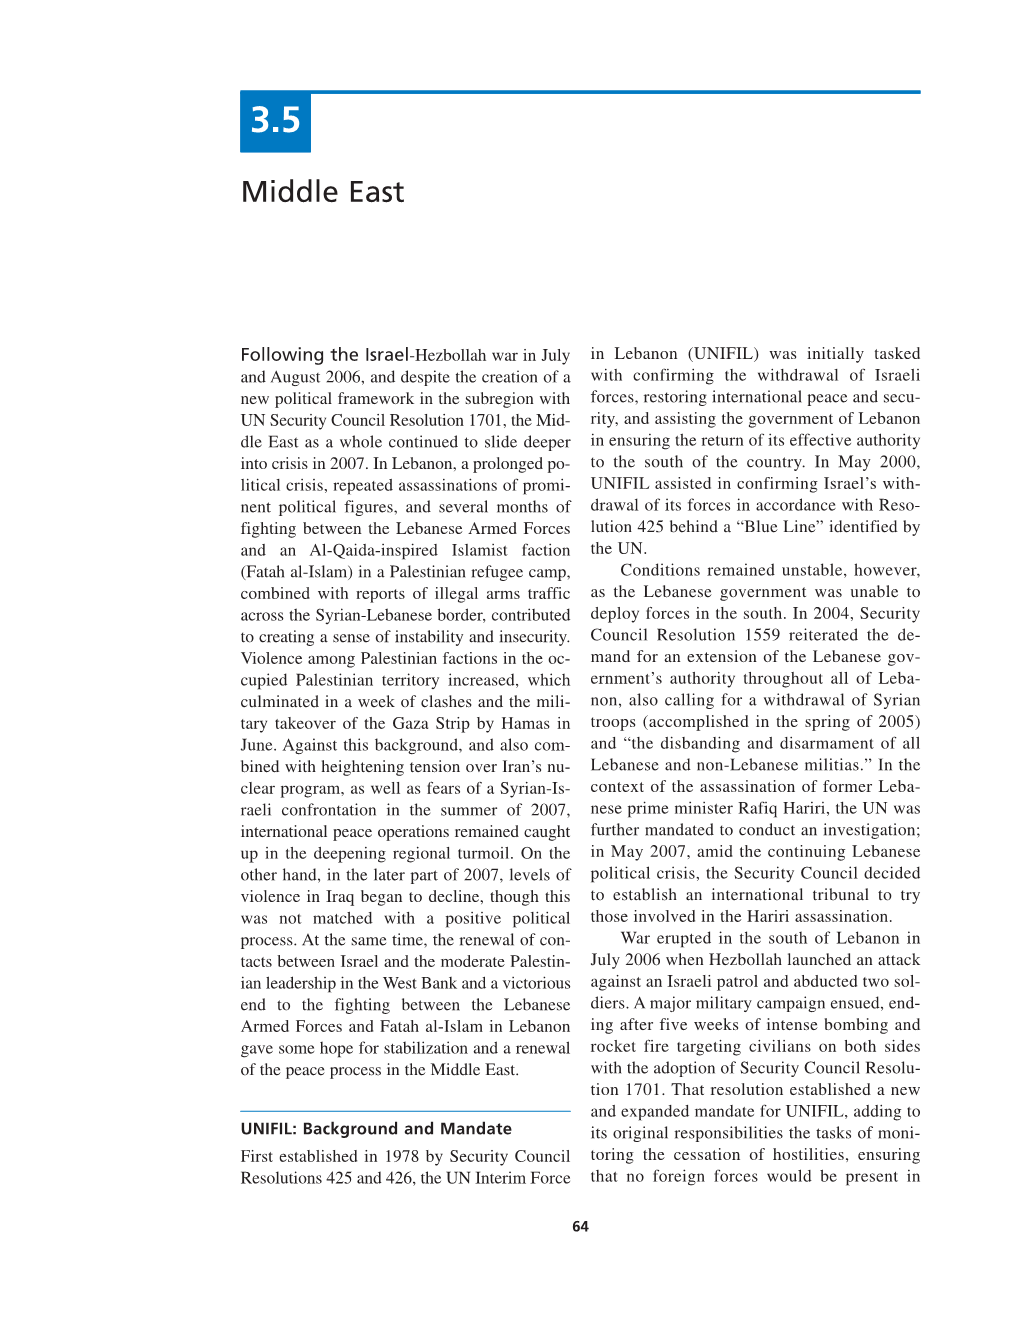 Middle East Mission Review